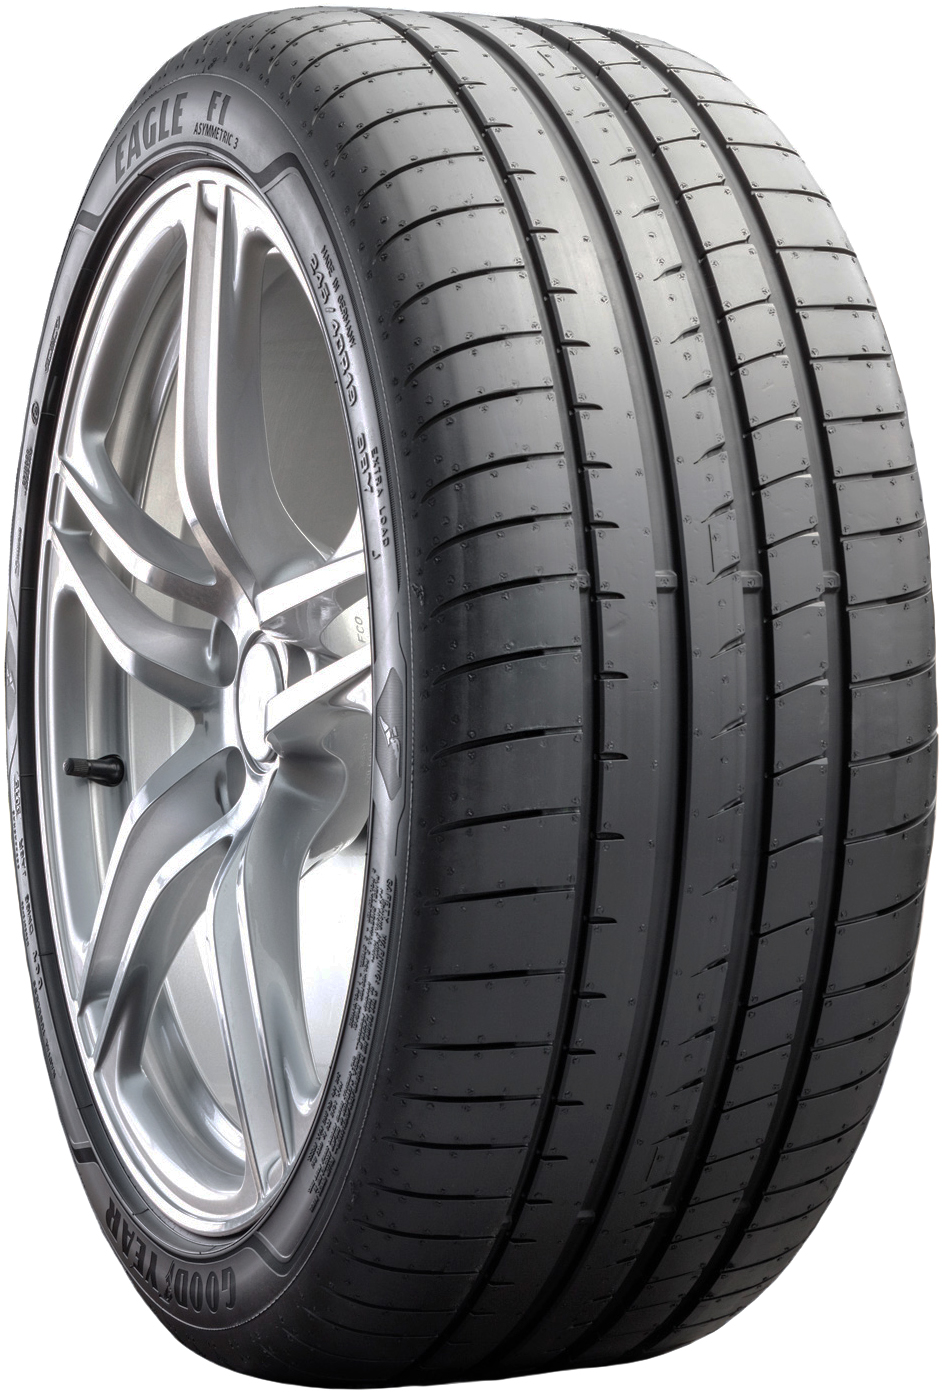 Anvelope auto GOODYEAR EAGF1AS3LR FP 225/45 R17 91W